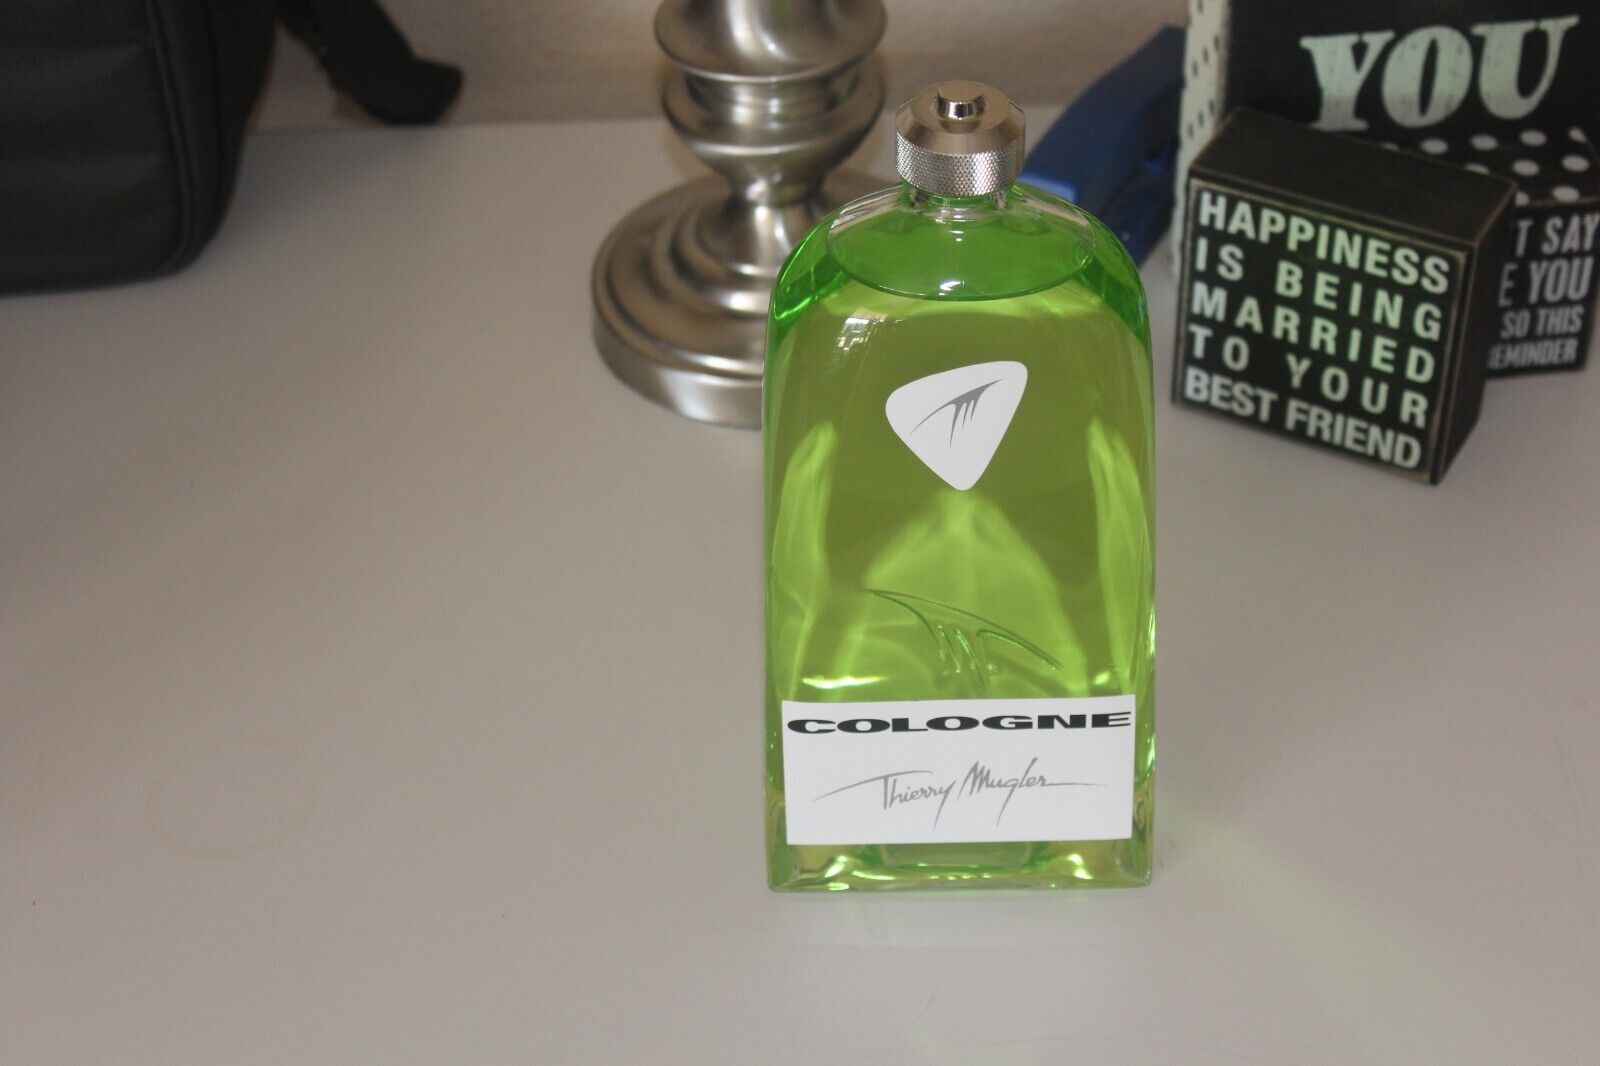 Factice Dummy Mugler Cologne Huge by Thierry Mugler, Made In France no fragrance